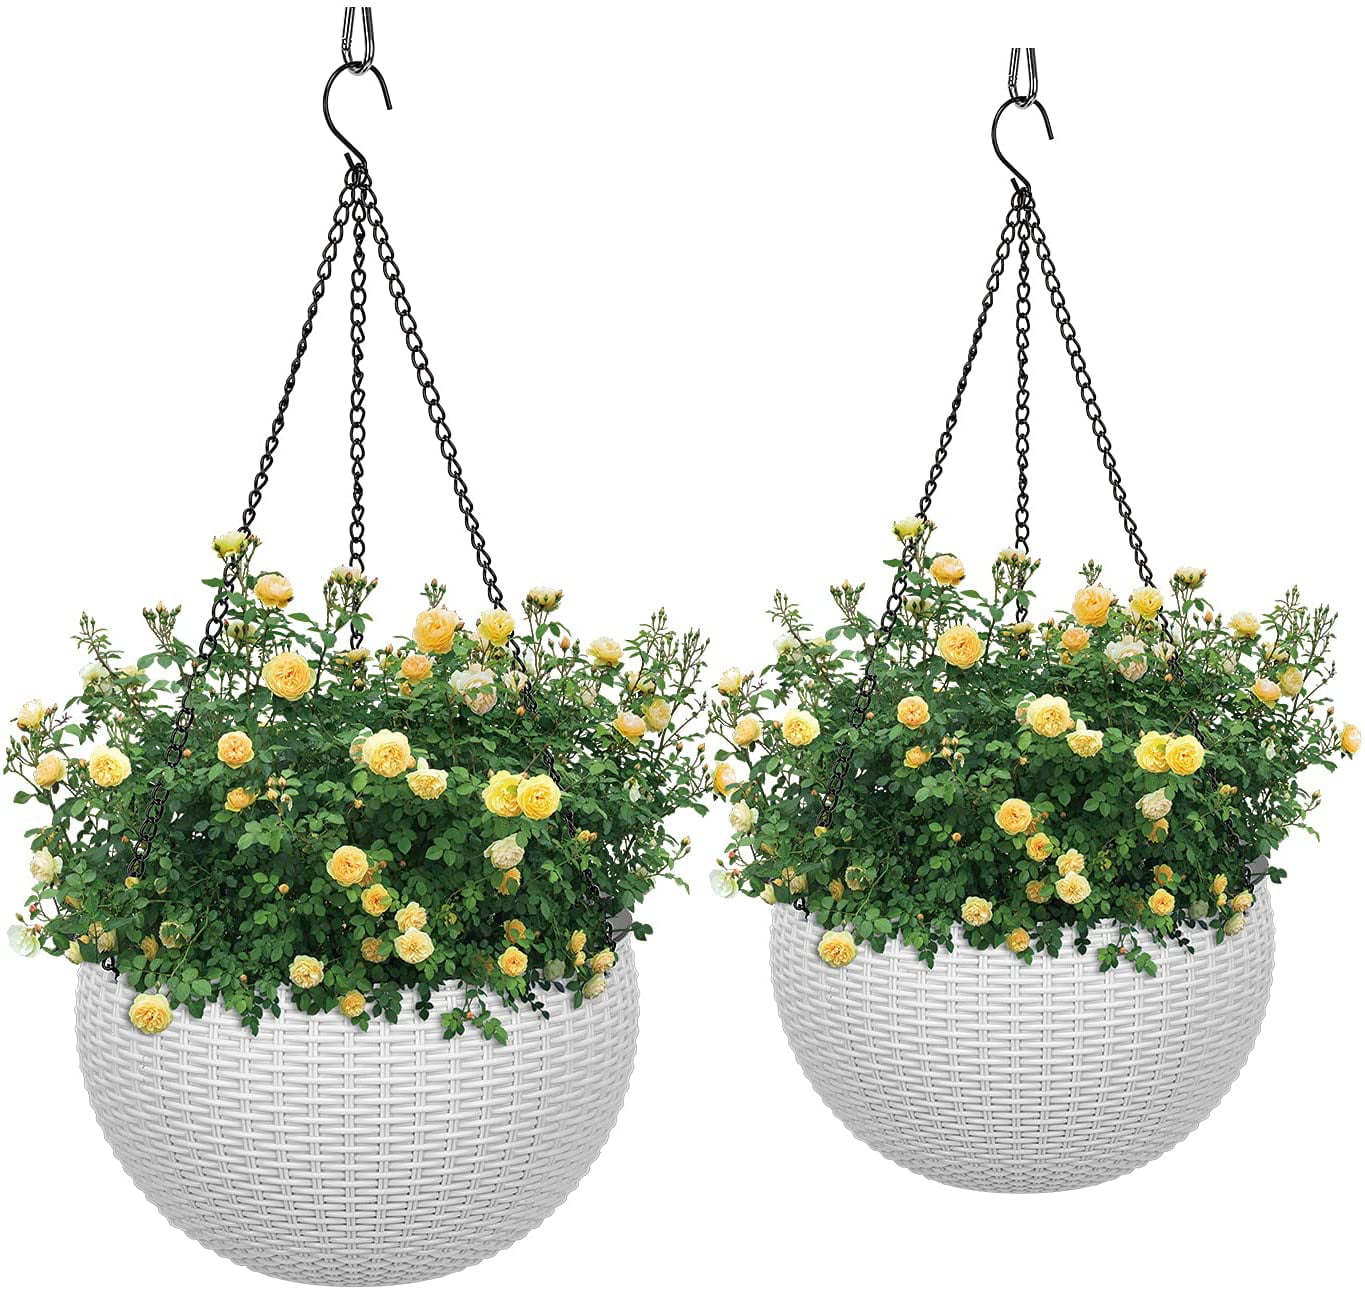 Details about   1 Pack 10.2” Hanging Basket Planters Self-Watering In-Outdoor .. NEW 